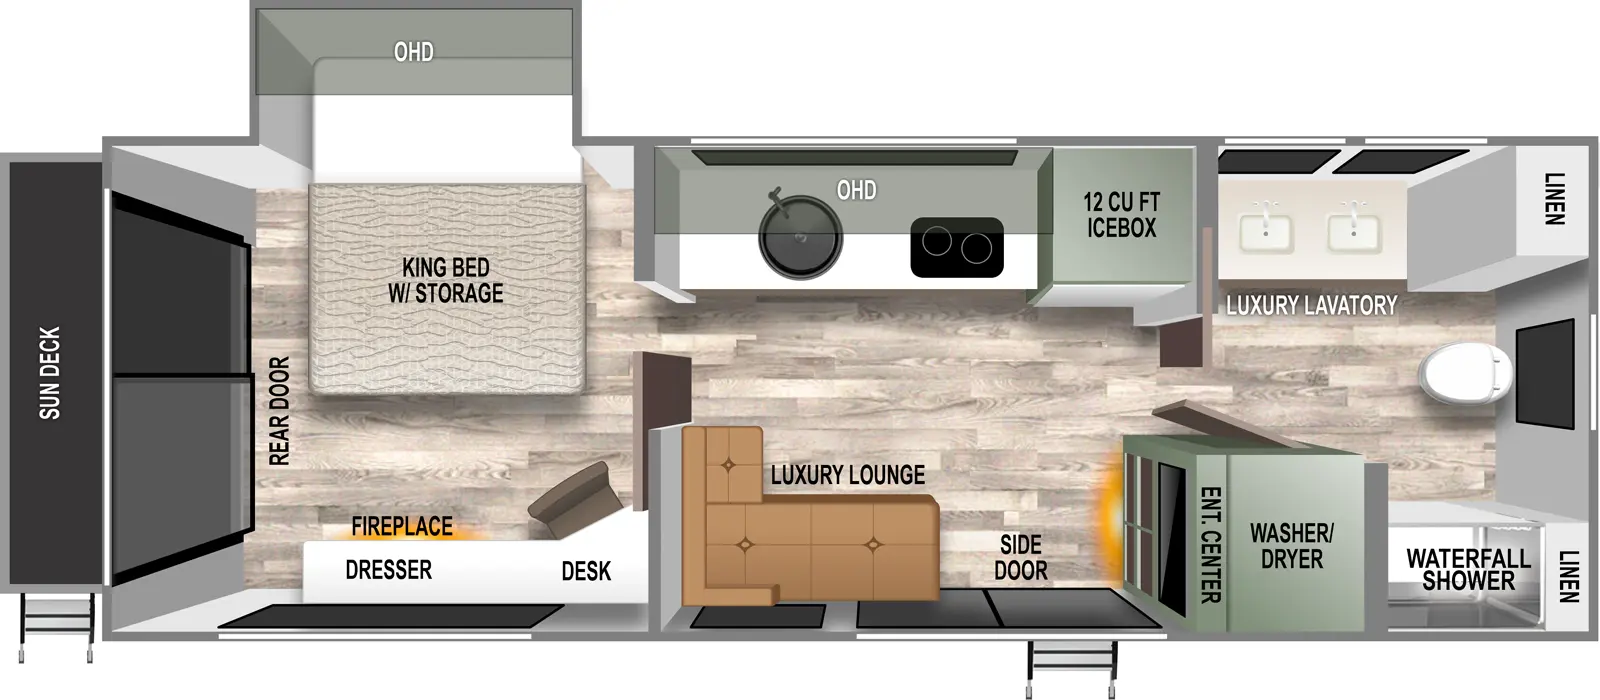 The RVS2 has one slideout and two entries. Interior layout front to back: full bathroom with linen closets, luxury lavatory with two sinks, waterfall shower, and washer/dryer; off-door side icebox, kitchen counter with cooktop, sink, and overhead cabinets; door side entertainment center, side door entry, and luxury lounge; rear bedroom with off-door side side-facing king bed slideout with storage and overhead cabinet, door side work area with desk, dresser and fireplace below, and rear door that leads to a sun deck with steps.